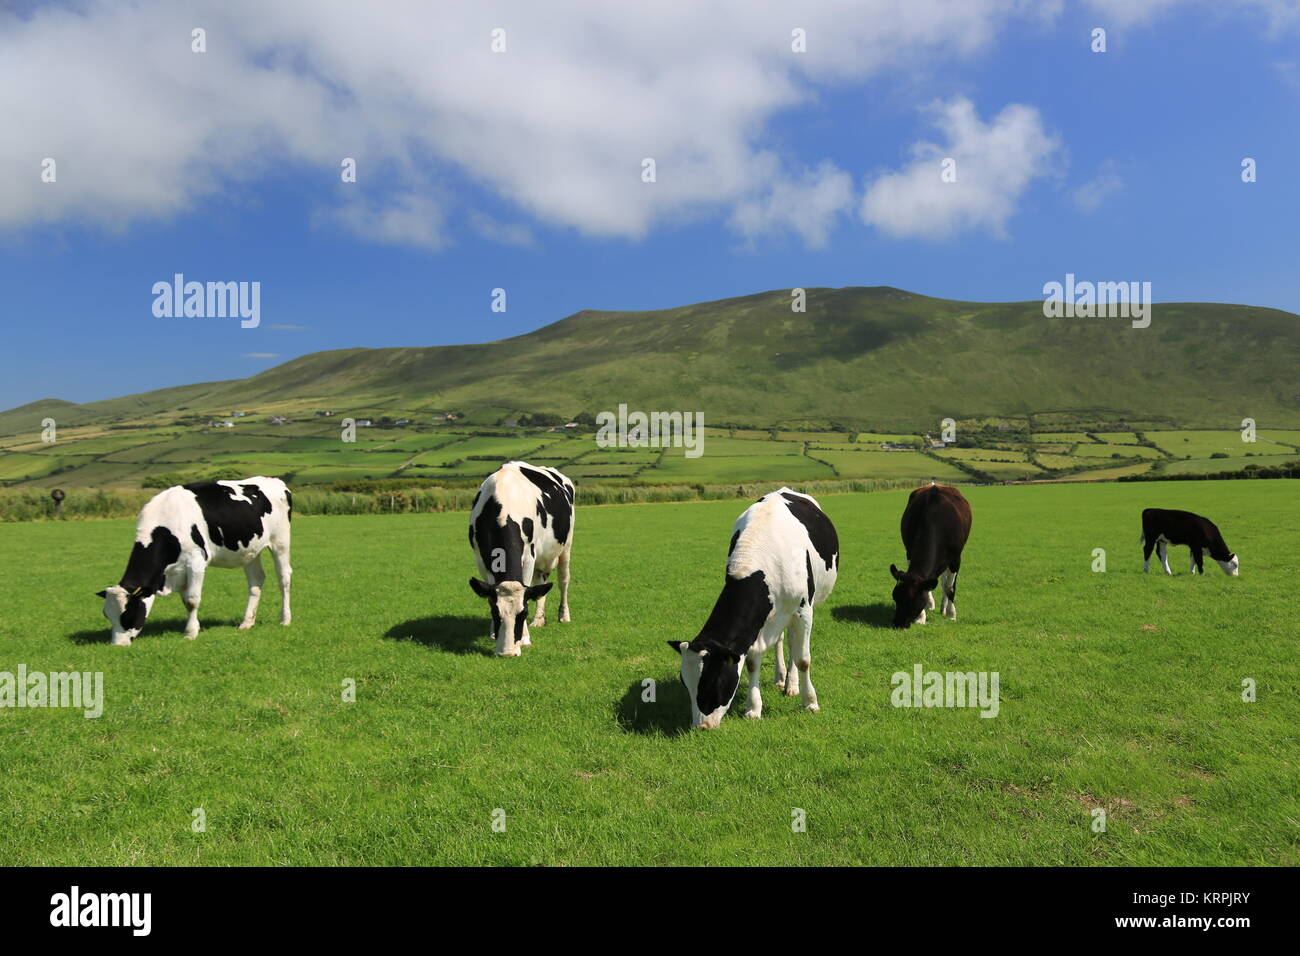 Cows grazing in a field in Ireland Stock Photo